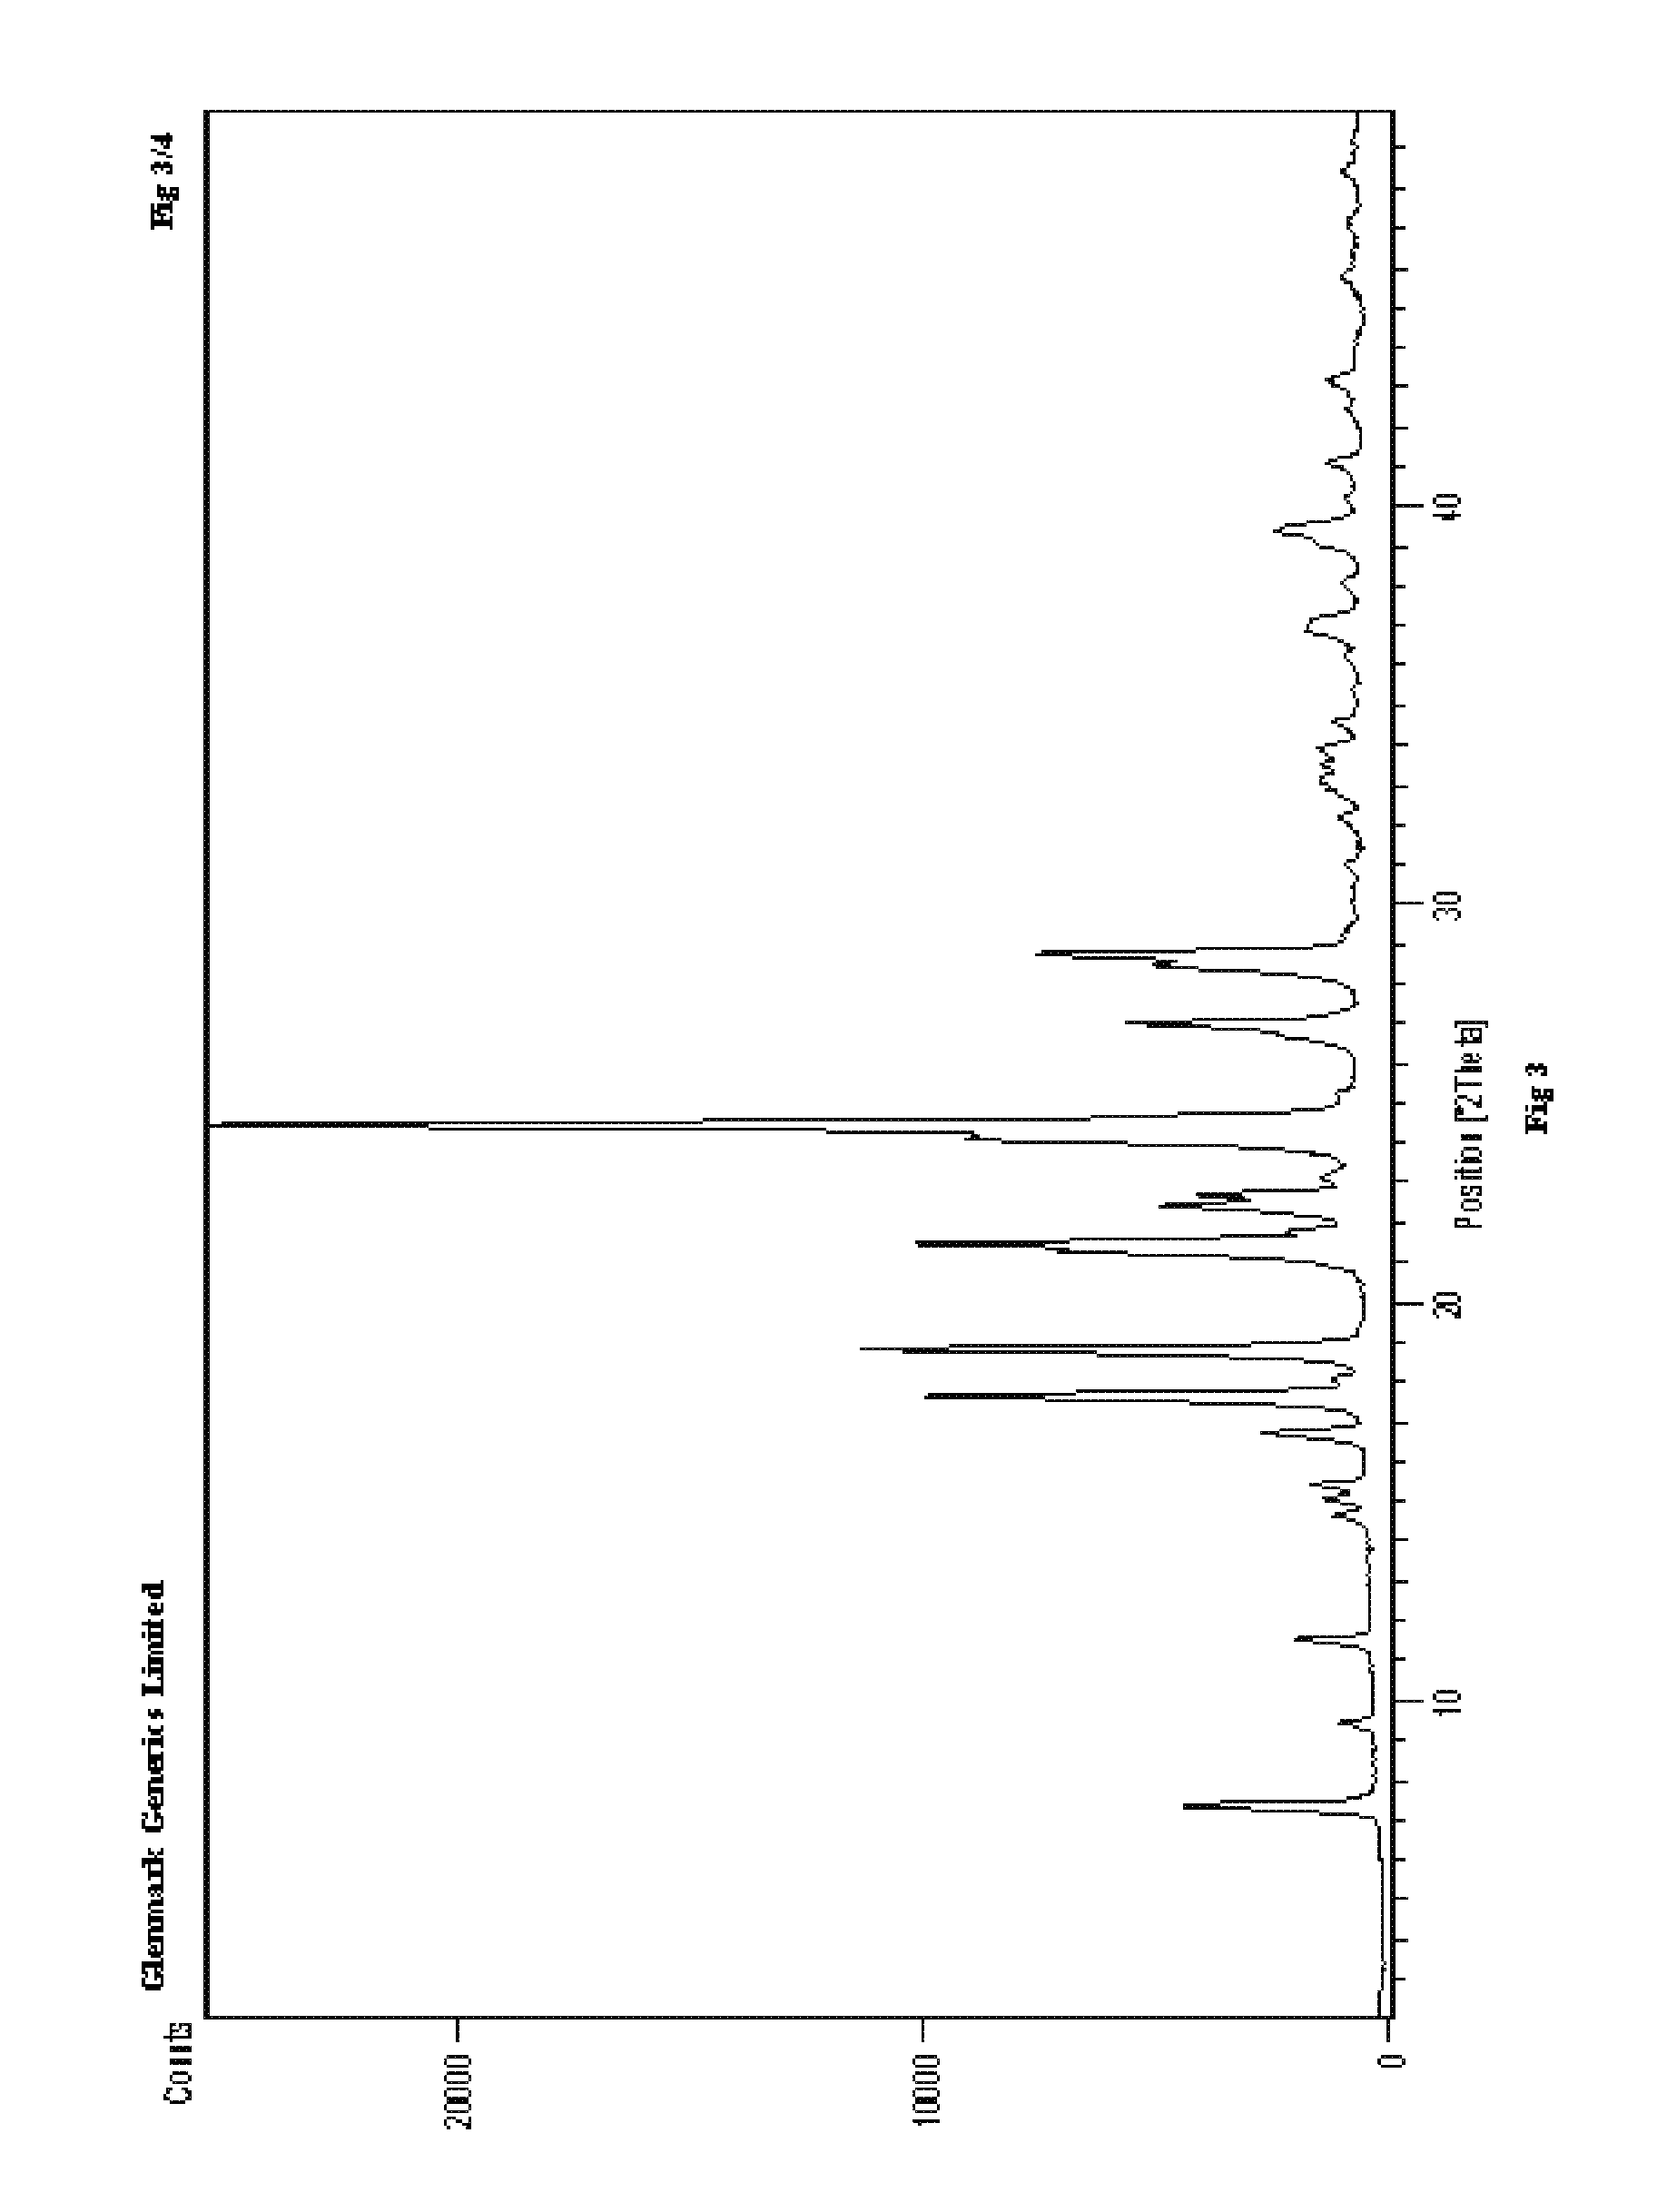 Process for the preparation of r-sitagliptin and its pharmaceutically acceptable salts thereof